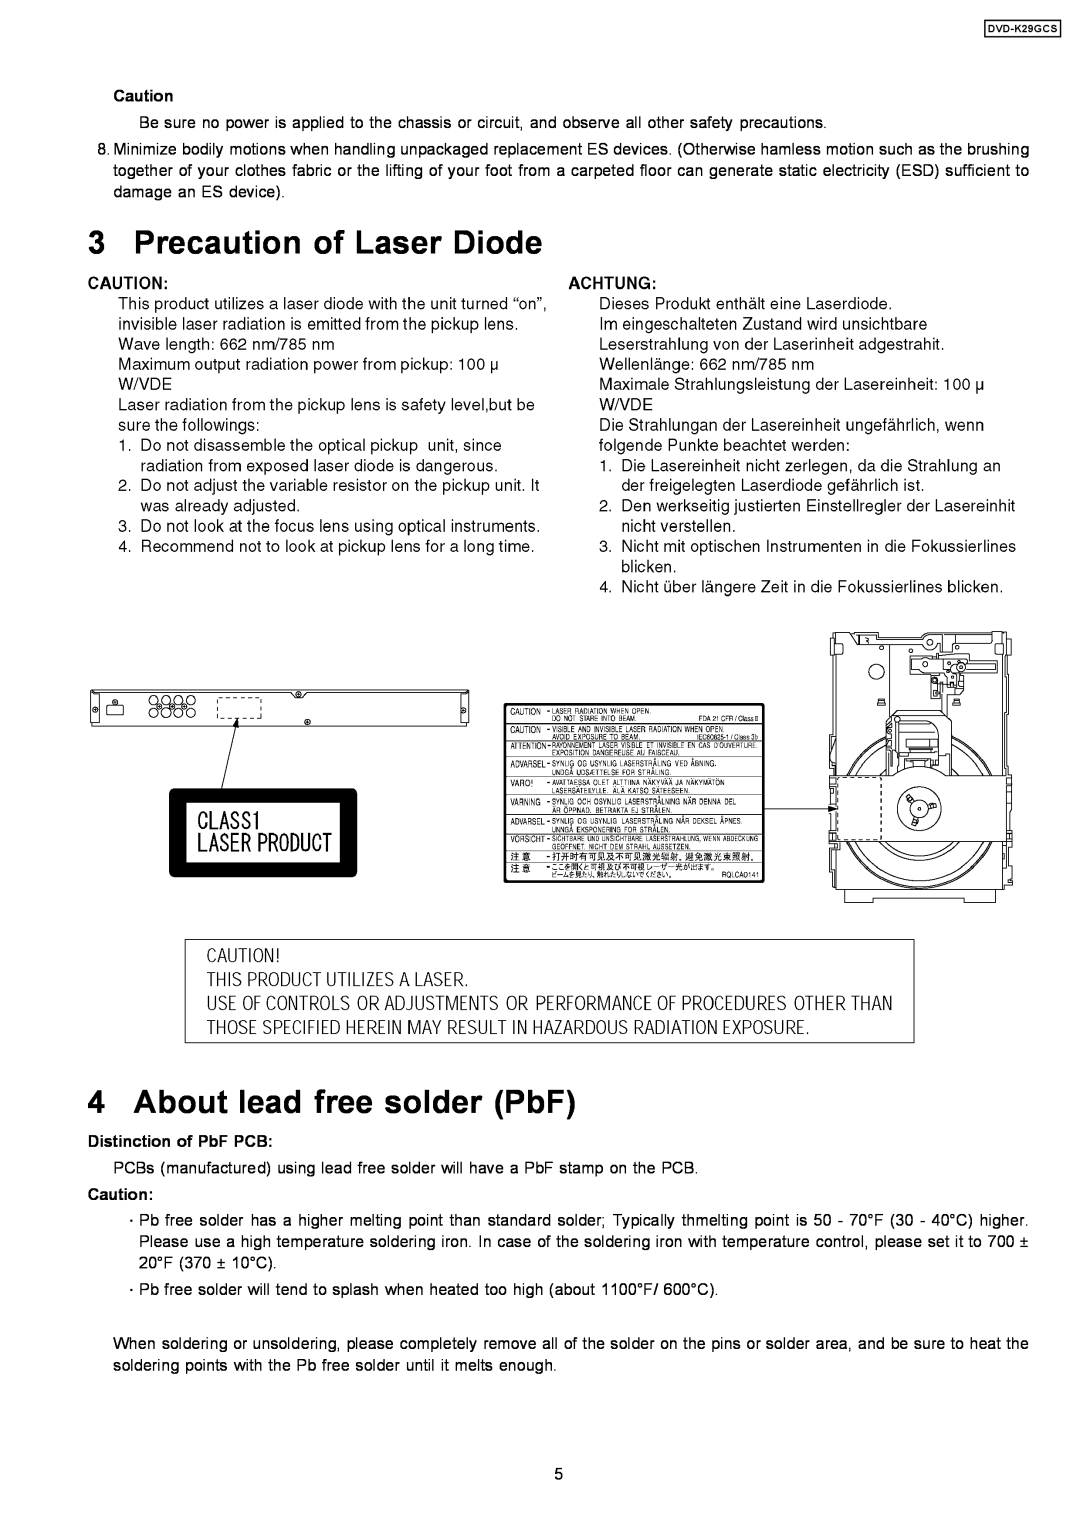 Panasonic DVD-K29GCS specifications Precaution of Laser Diode, About lead free solder PbF, Distinction of PbF PCB 